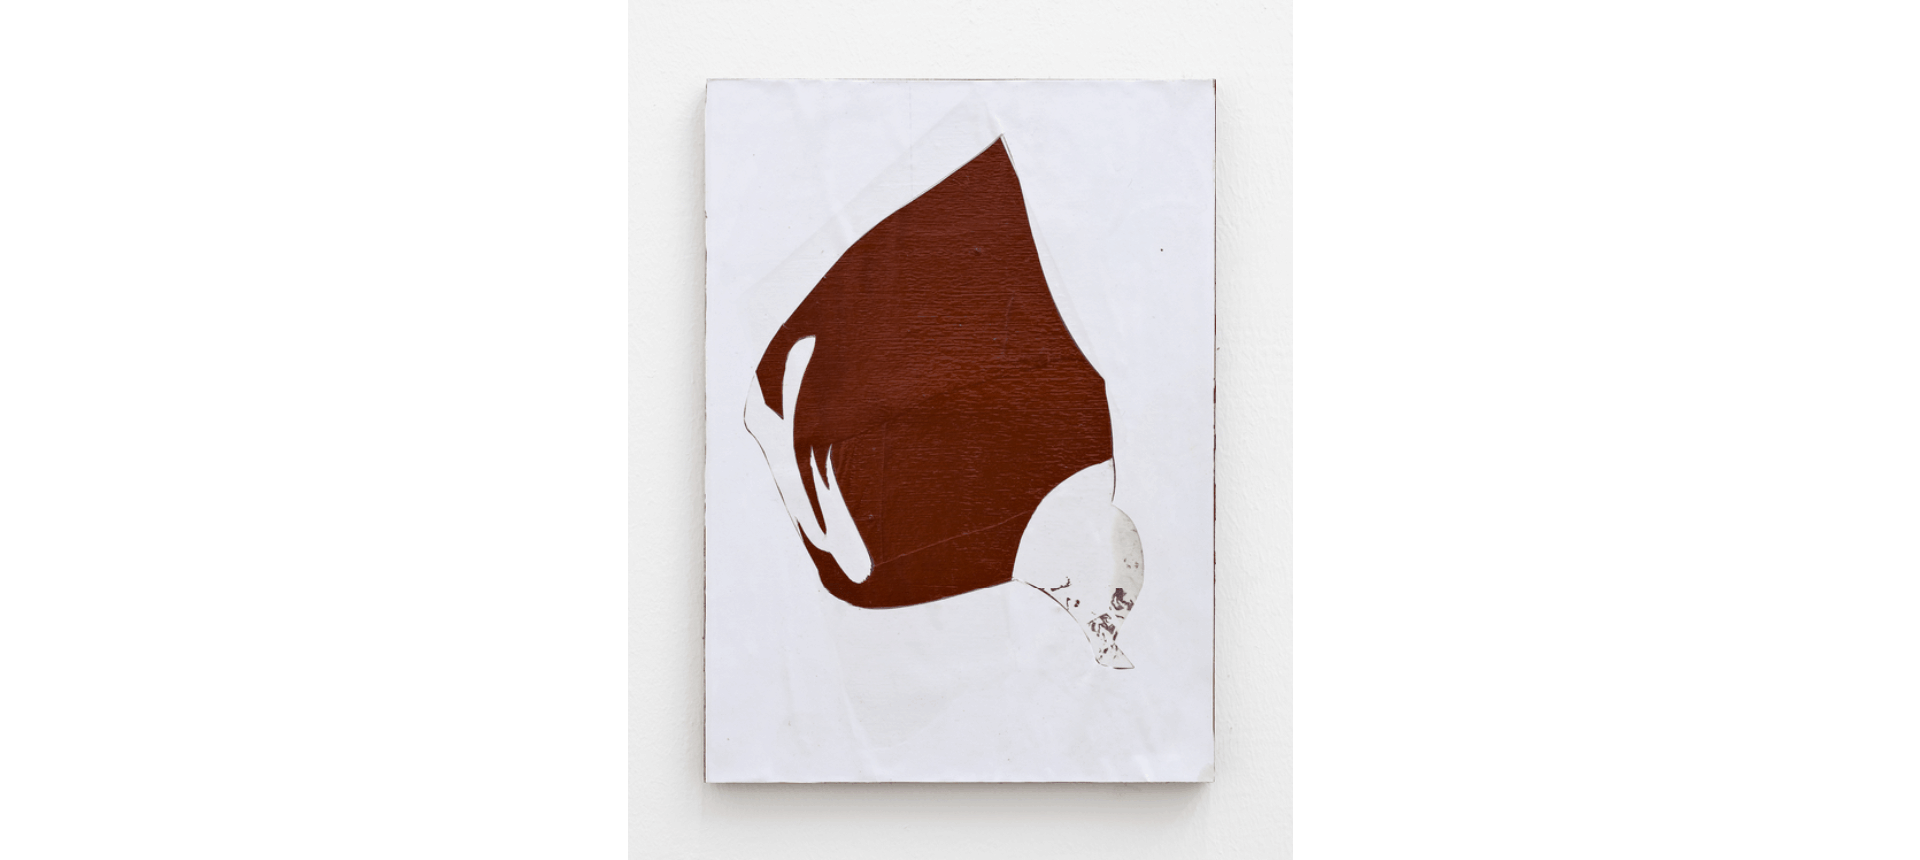 Ohne Titel (aus der Serie „Images"), 2020 Oil and paper on MDF 11 4/5 × 8 3/10 in 30 × 21 cm